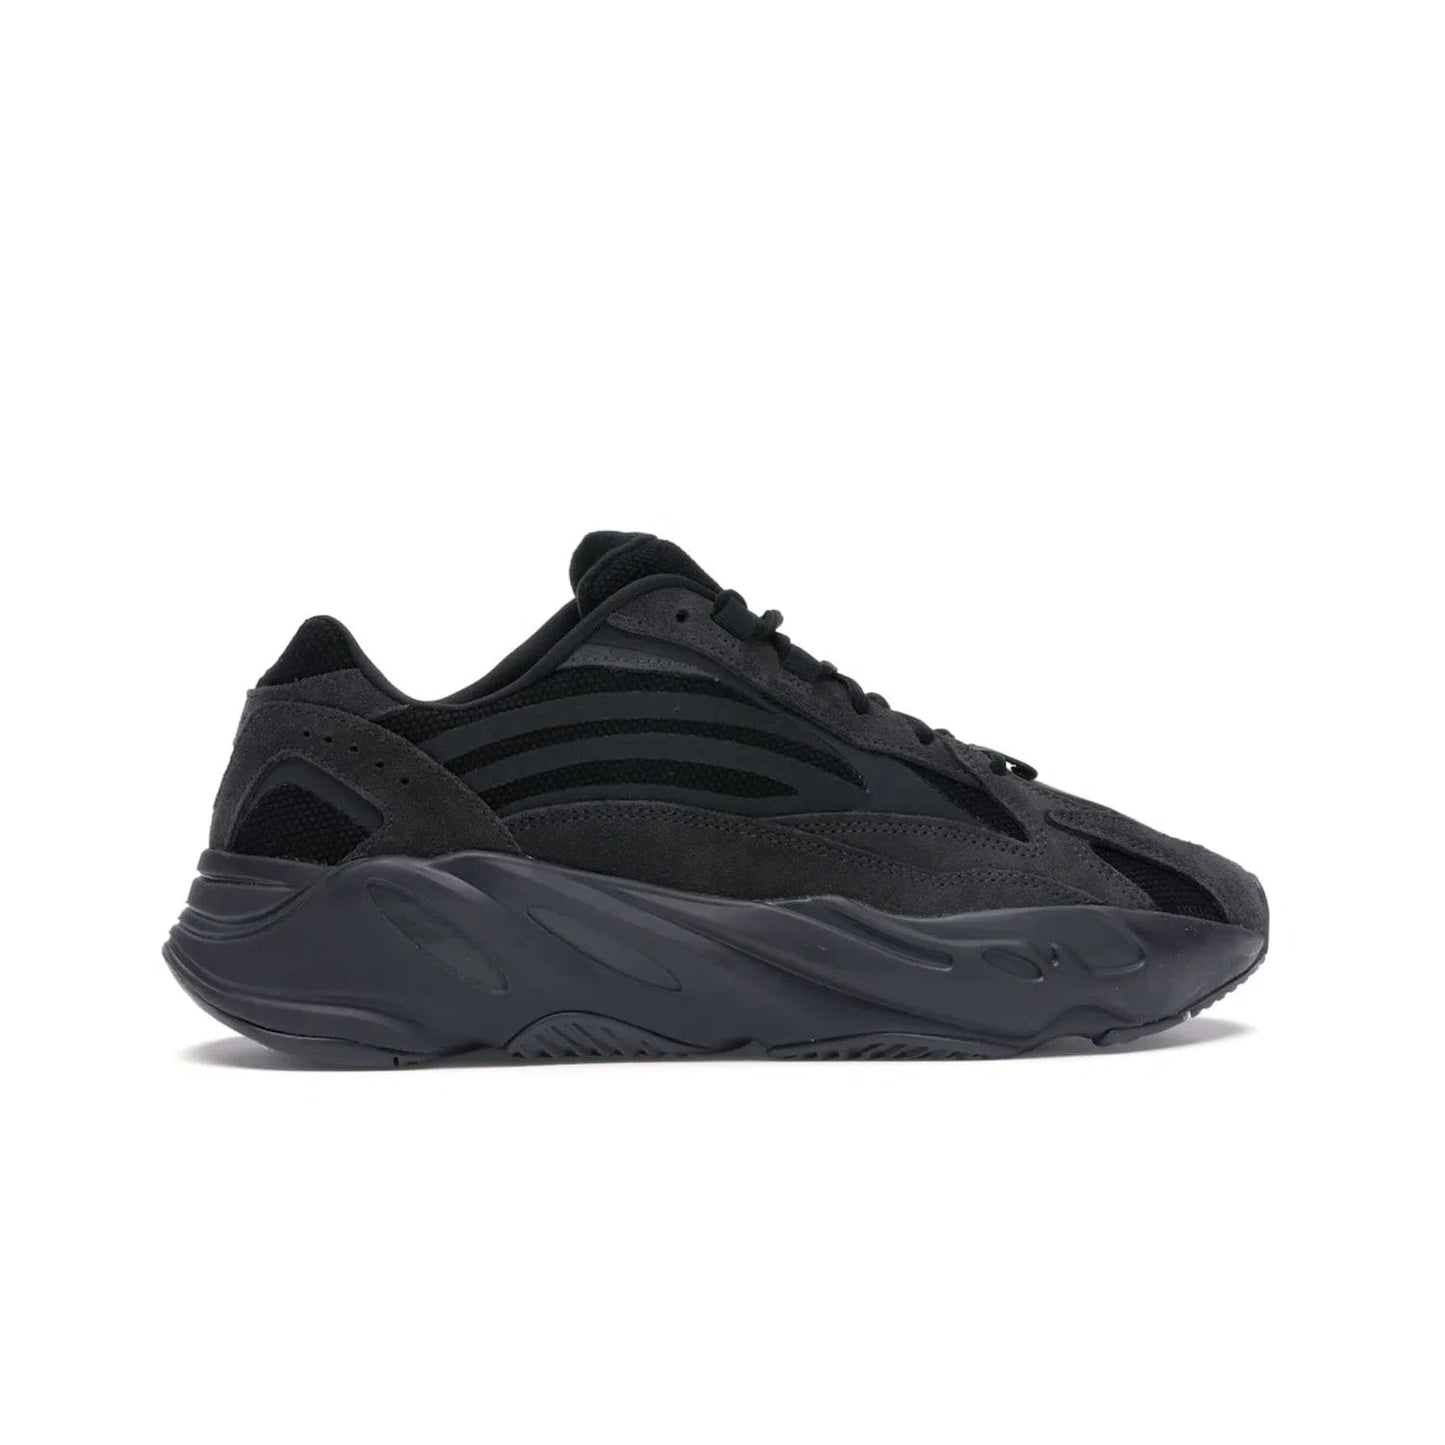 adidas Yeezy Boost 700 V2 Vanta - Image 36 - Only at www.BallersClubKickz.com - Introducing the adidas Yeezy Boost 700 V2 Vanta - a sleek and stylish all-black design featuring a combination of mesh, leather, and suede construction with signature Boost cushioning in the sole. The ultimate in comfort and support.